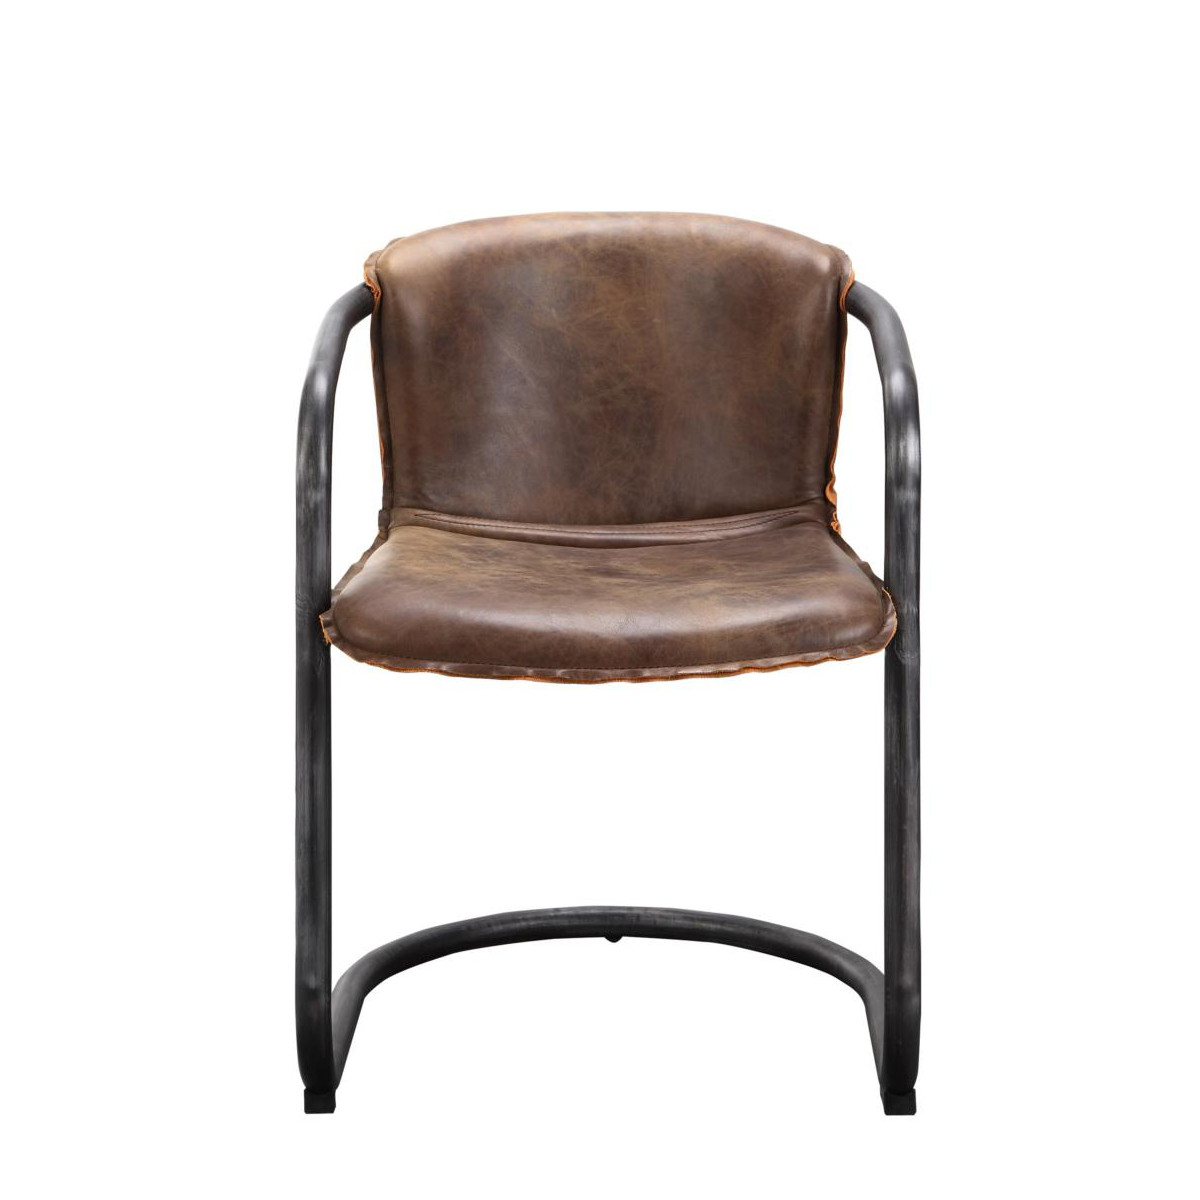 Top Grain Brown Leather Dining Chair | Curated Living